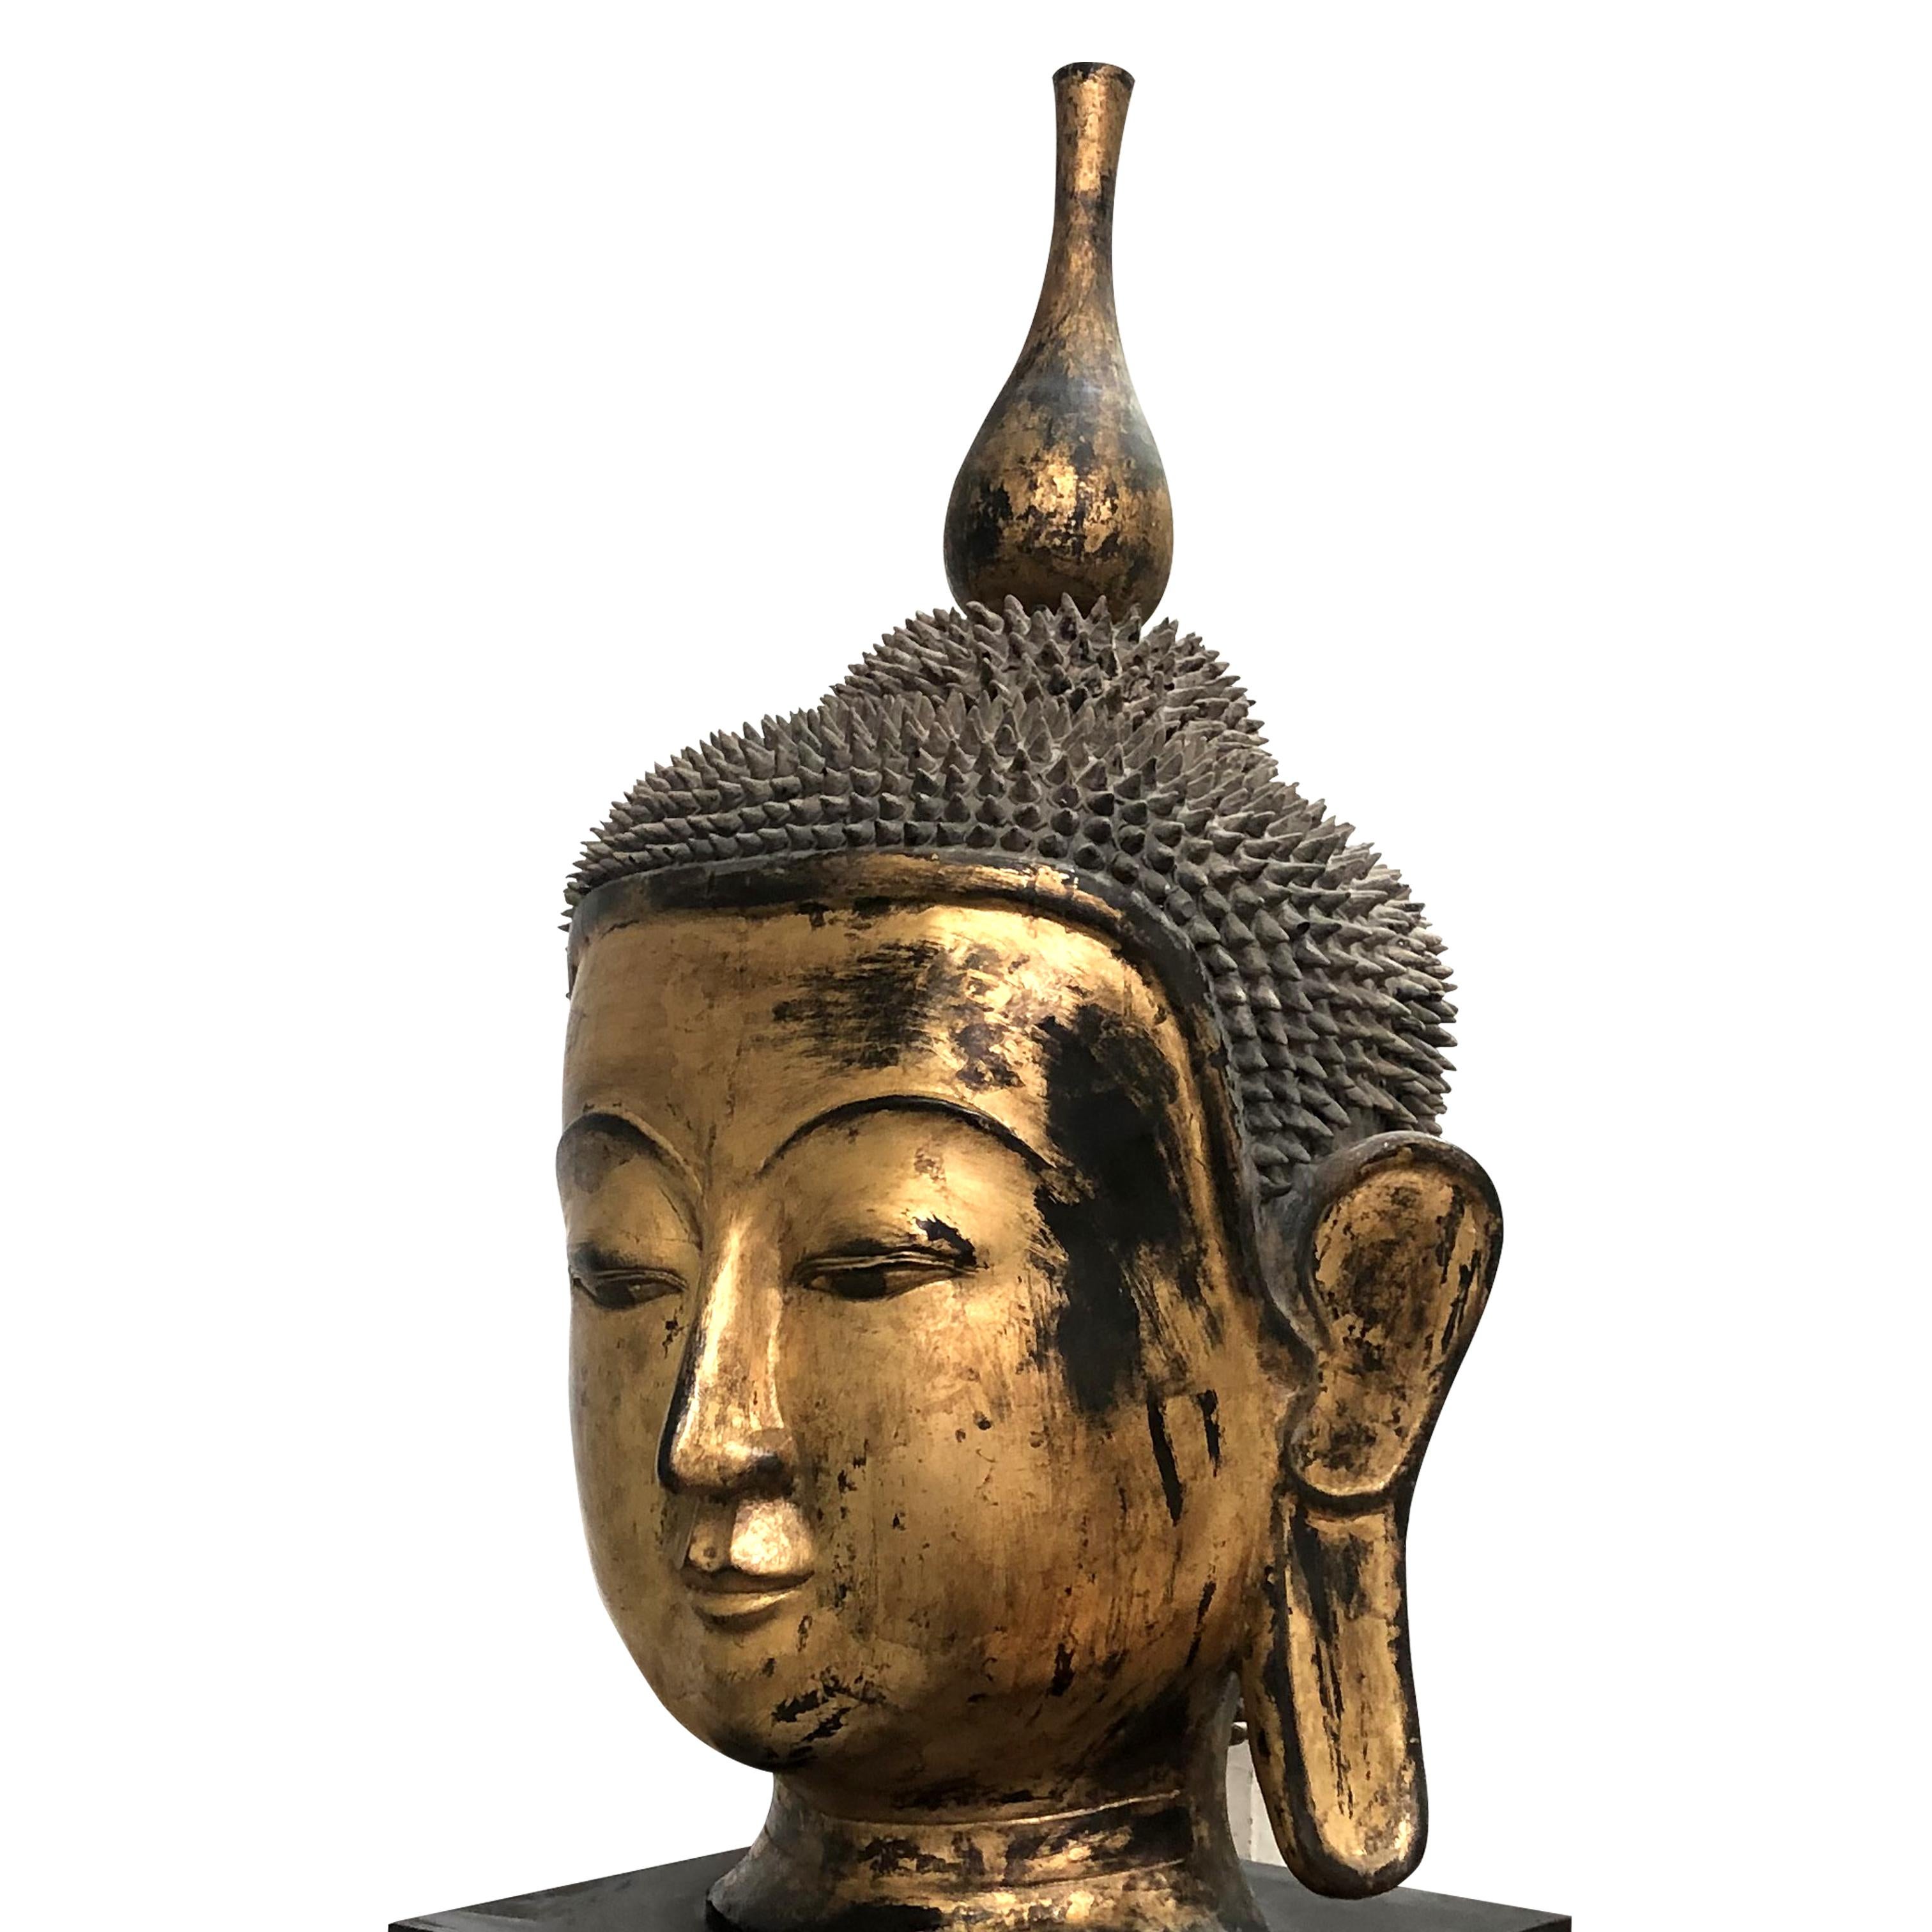 Wood Early 20th Century Shan Burmese Large Dry Lacquer Gilt Buddha Head Sculpture